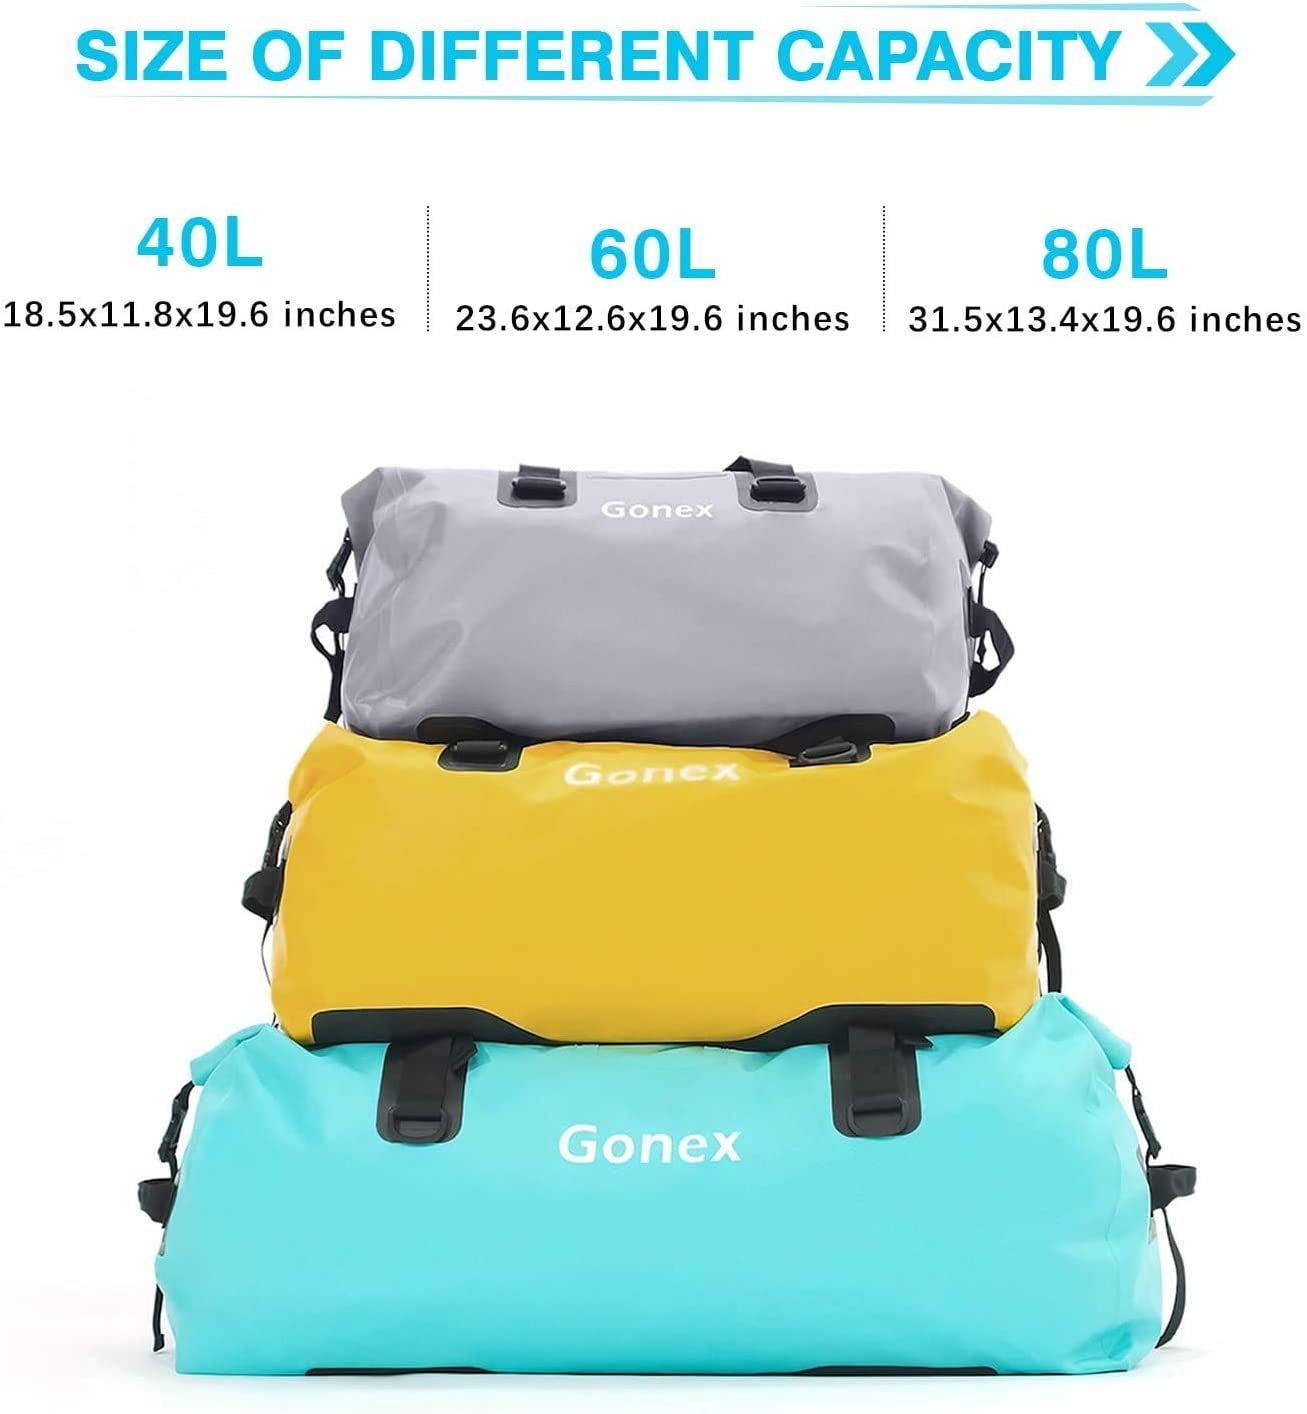 Gonex 60L 80L Extra Large Waterproof Duffle Travel Dry Duffel Bag Heavy Duty Bag with Durable Straps & Handles for Kayaking Paddleboarding Boating Rafting Fishing